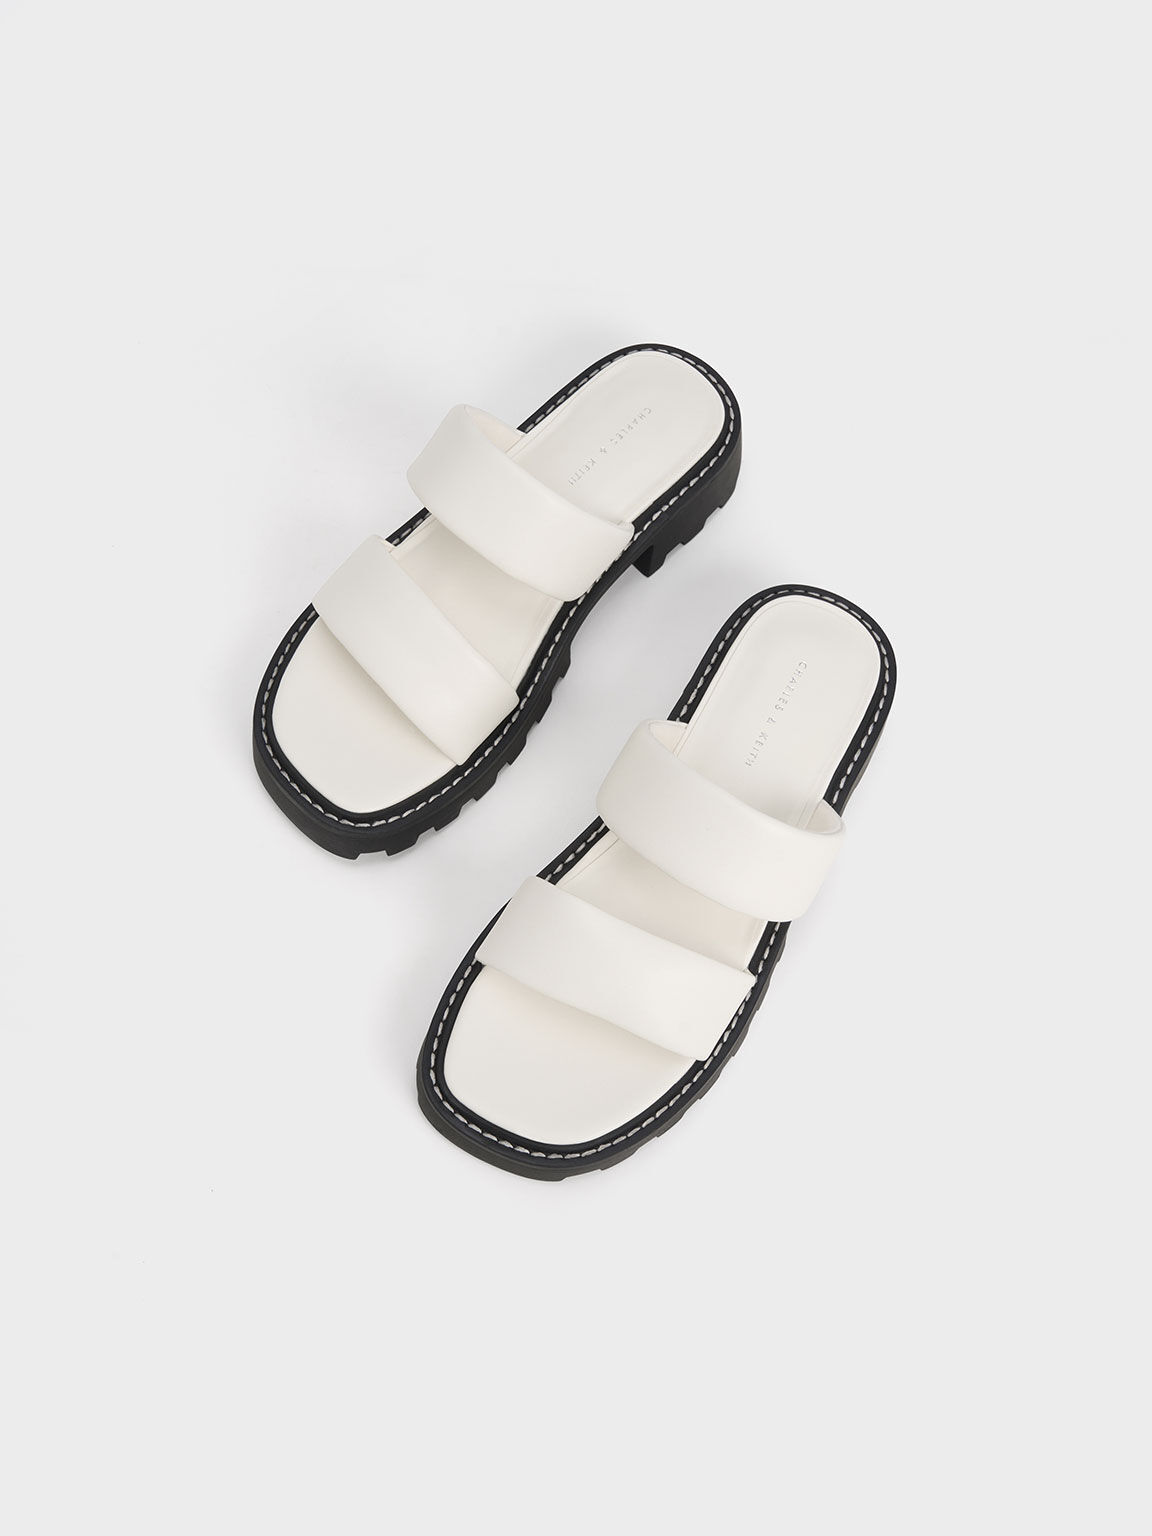 Padded Double Strap Sliders, White, hi-res